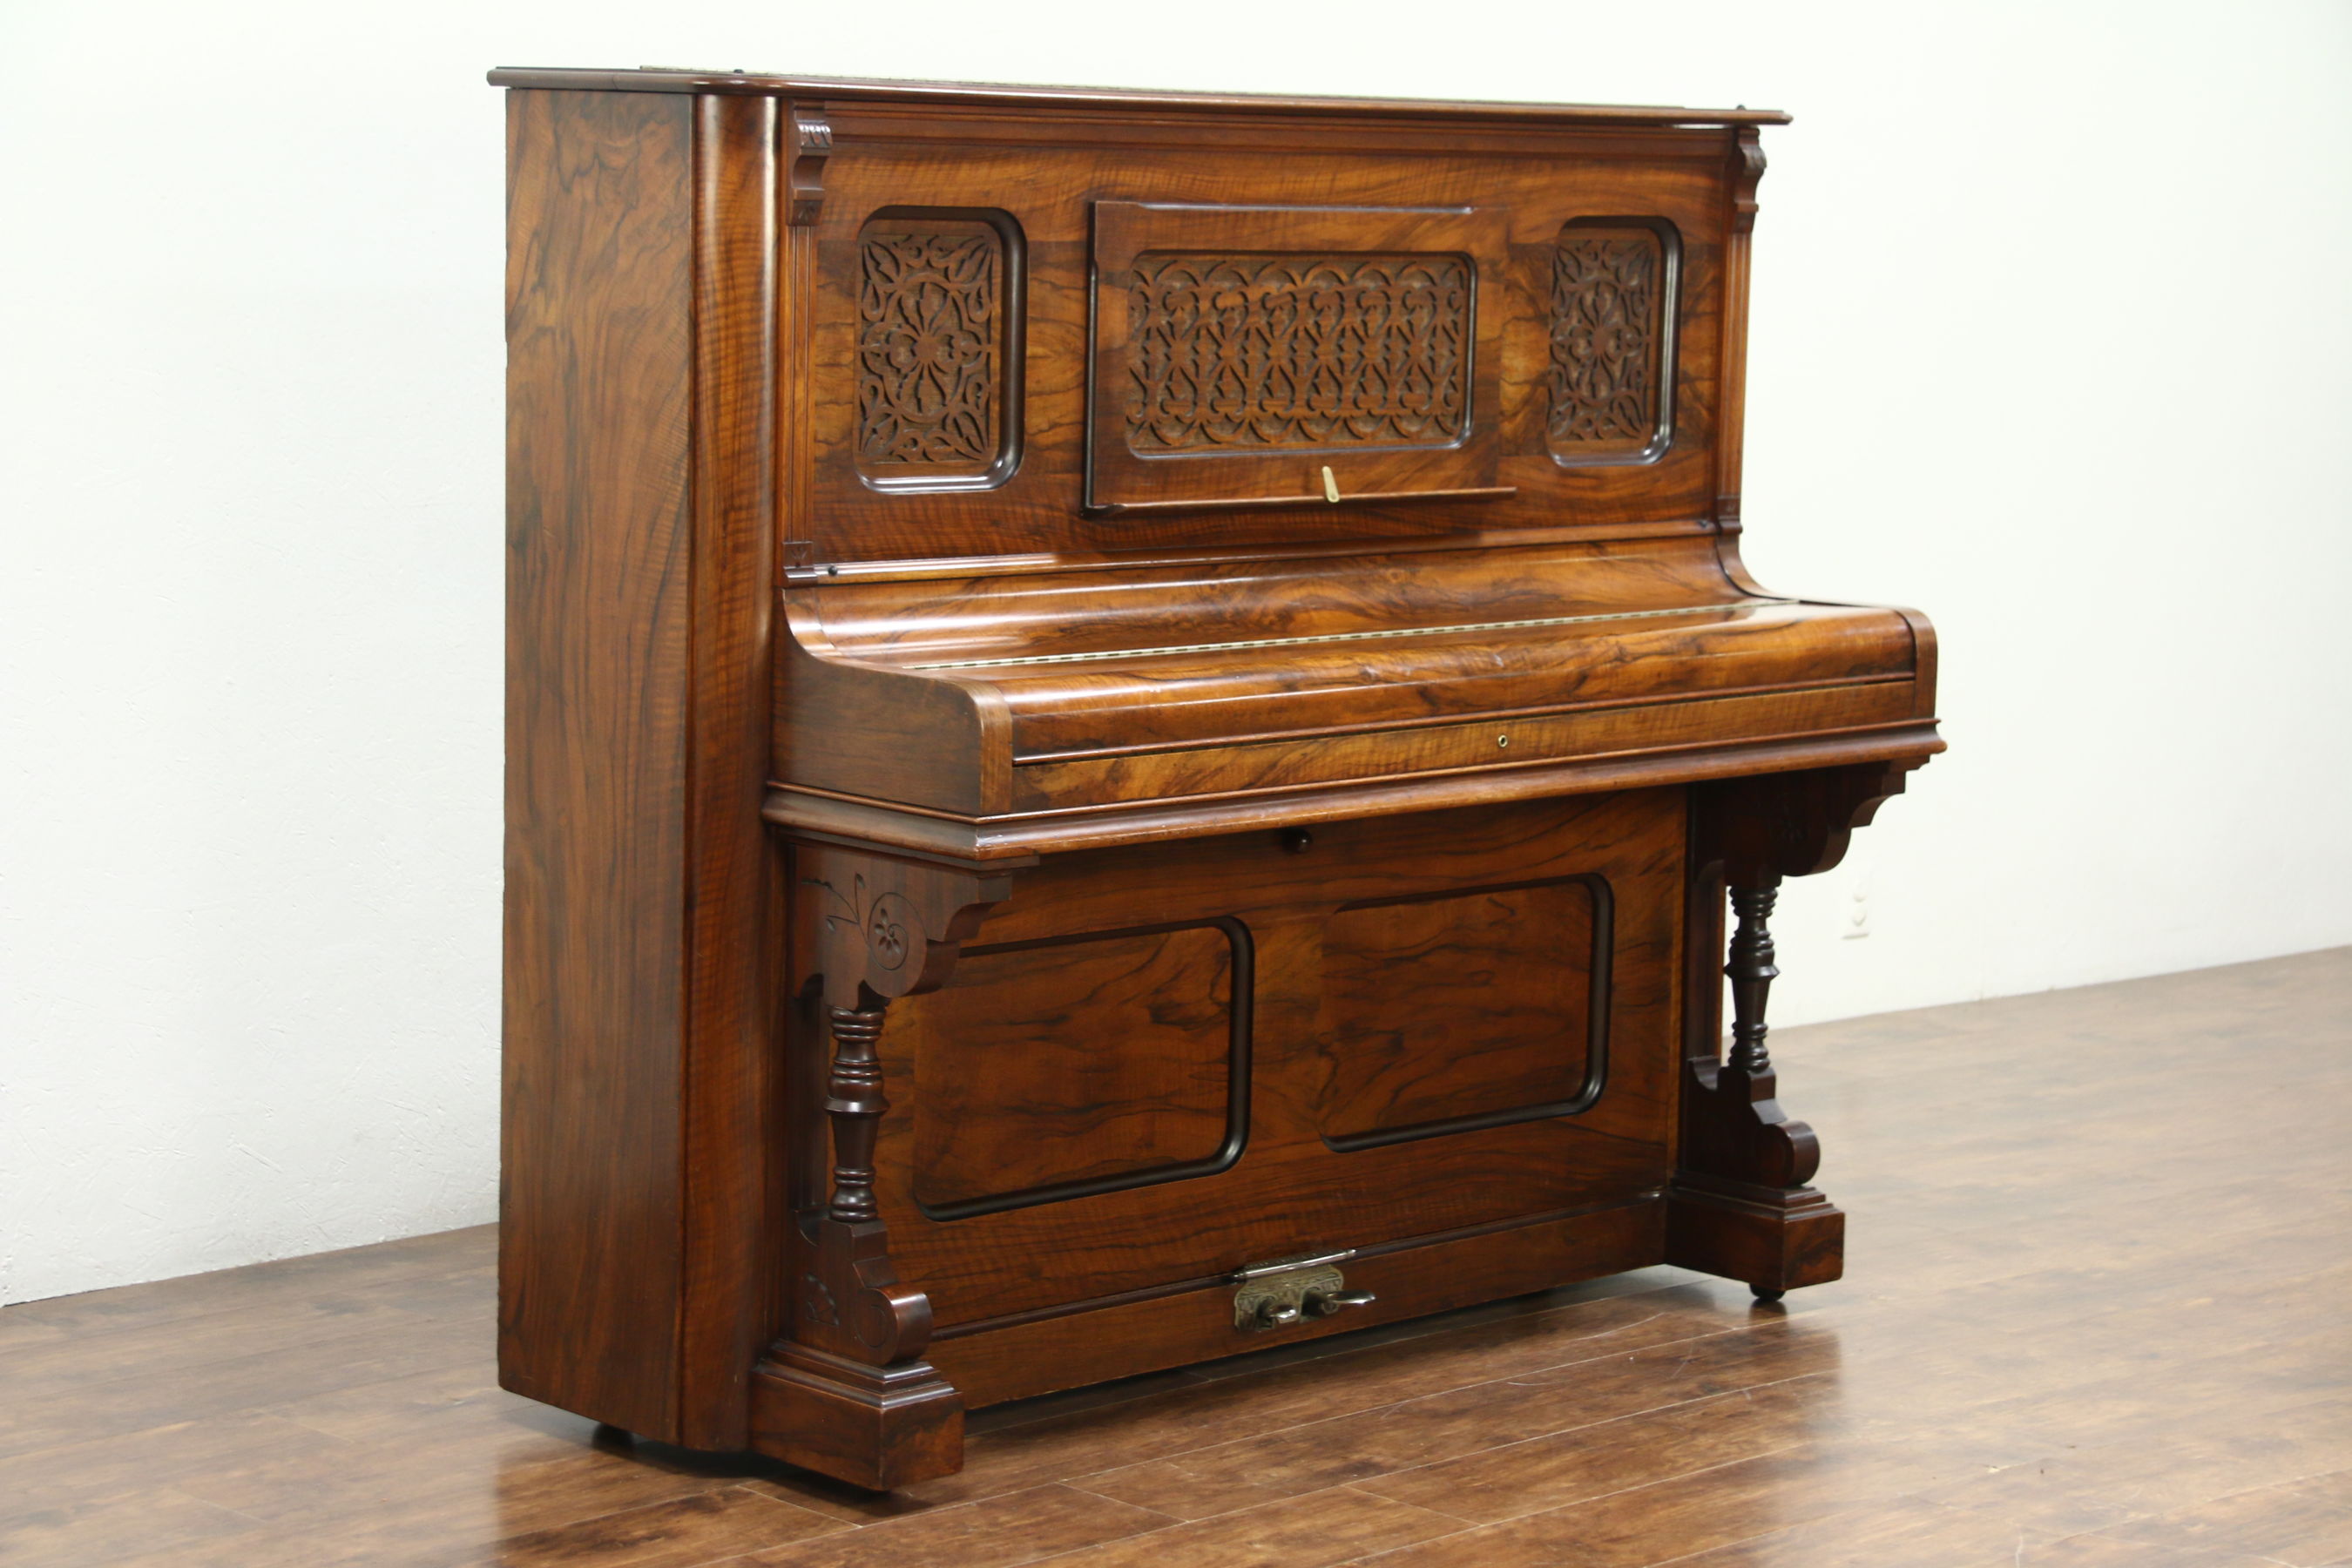 SOLD - Victorian 1890's Antique Piano, Signed Morris of Canada ...